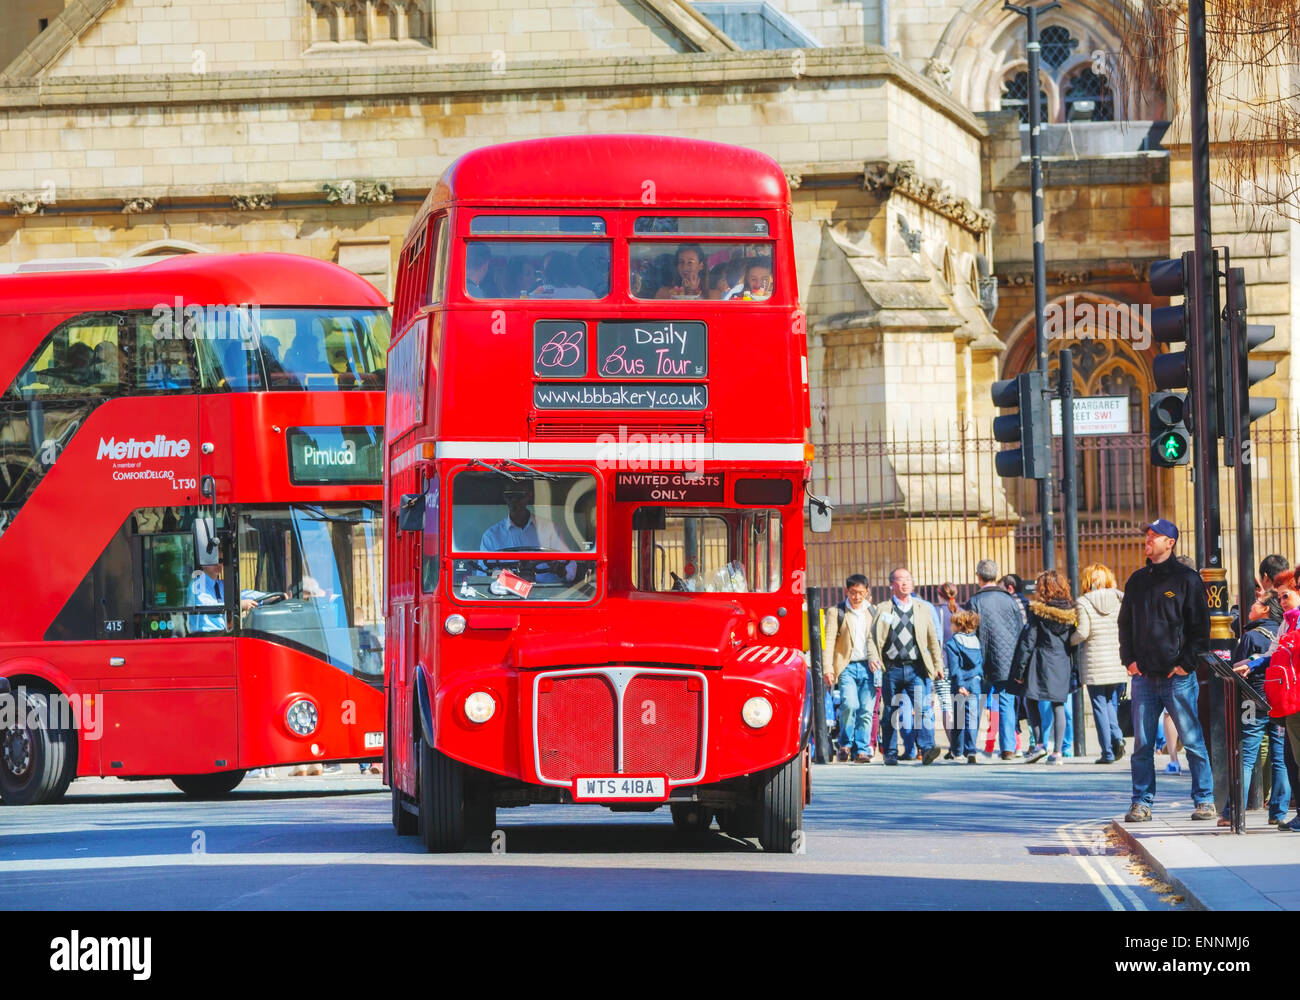 LONDON - APRIL 12: Iconic red double decker bus on April 12, 2015 in London, UK. Stock Photo